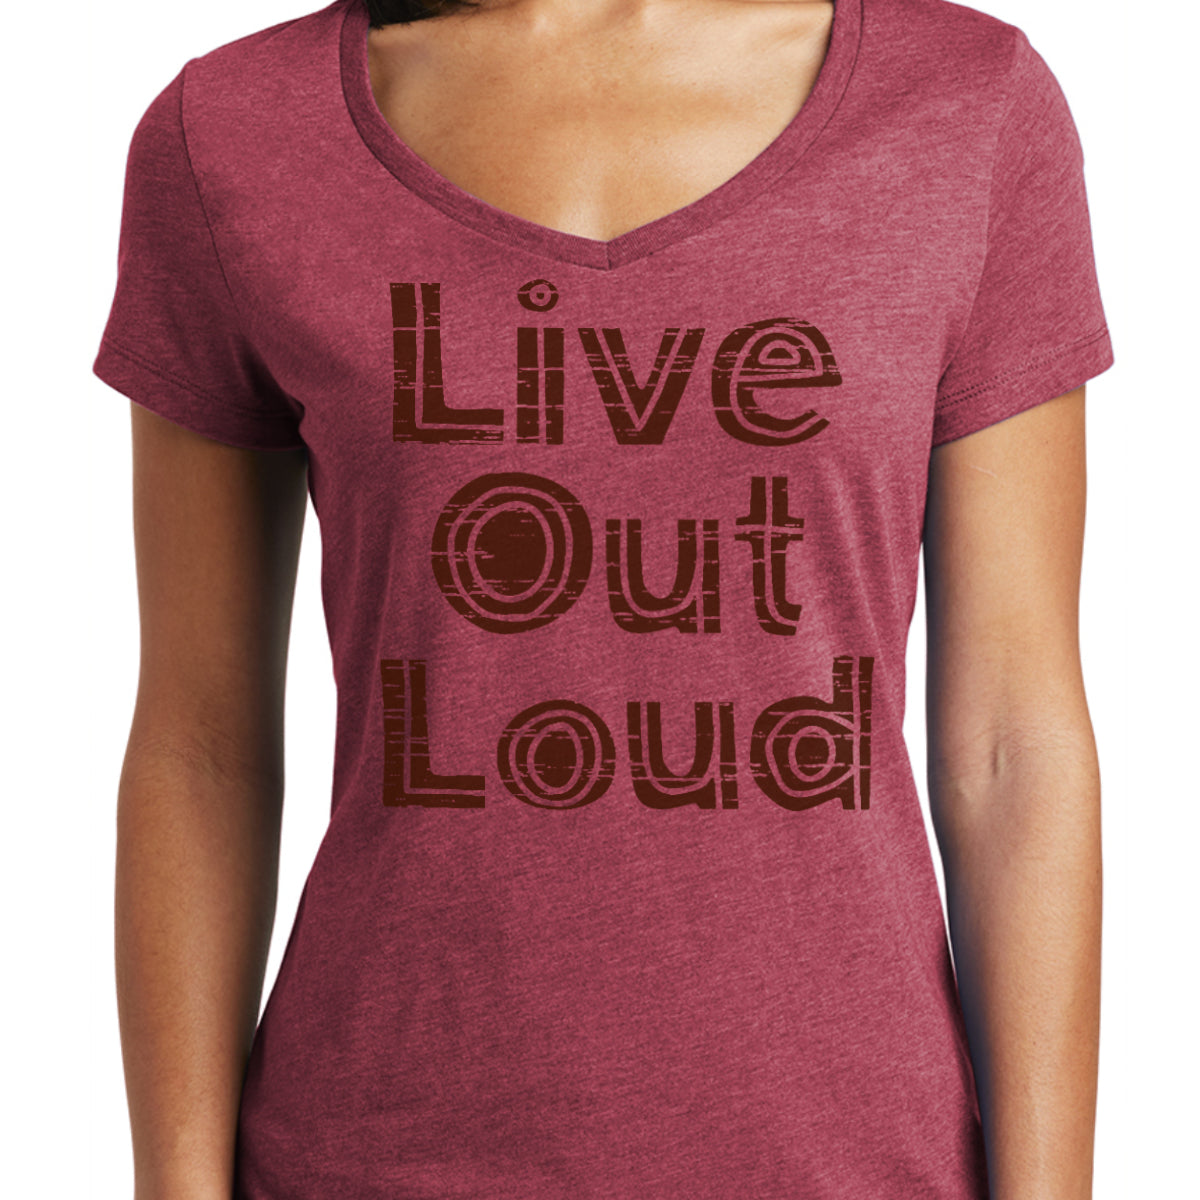 Live Out Loud - V-neck Women's Fitted Tshirt